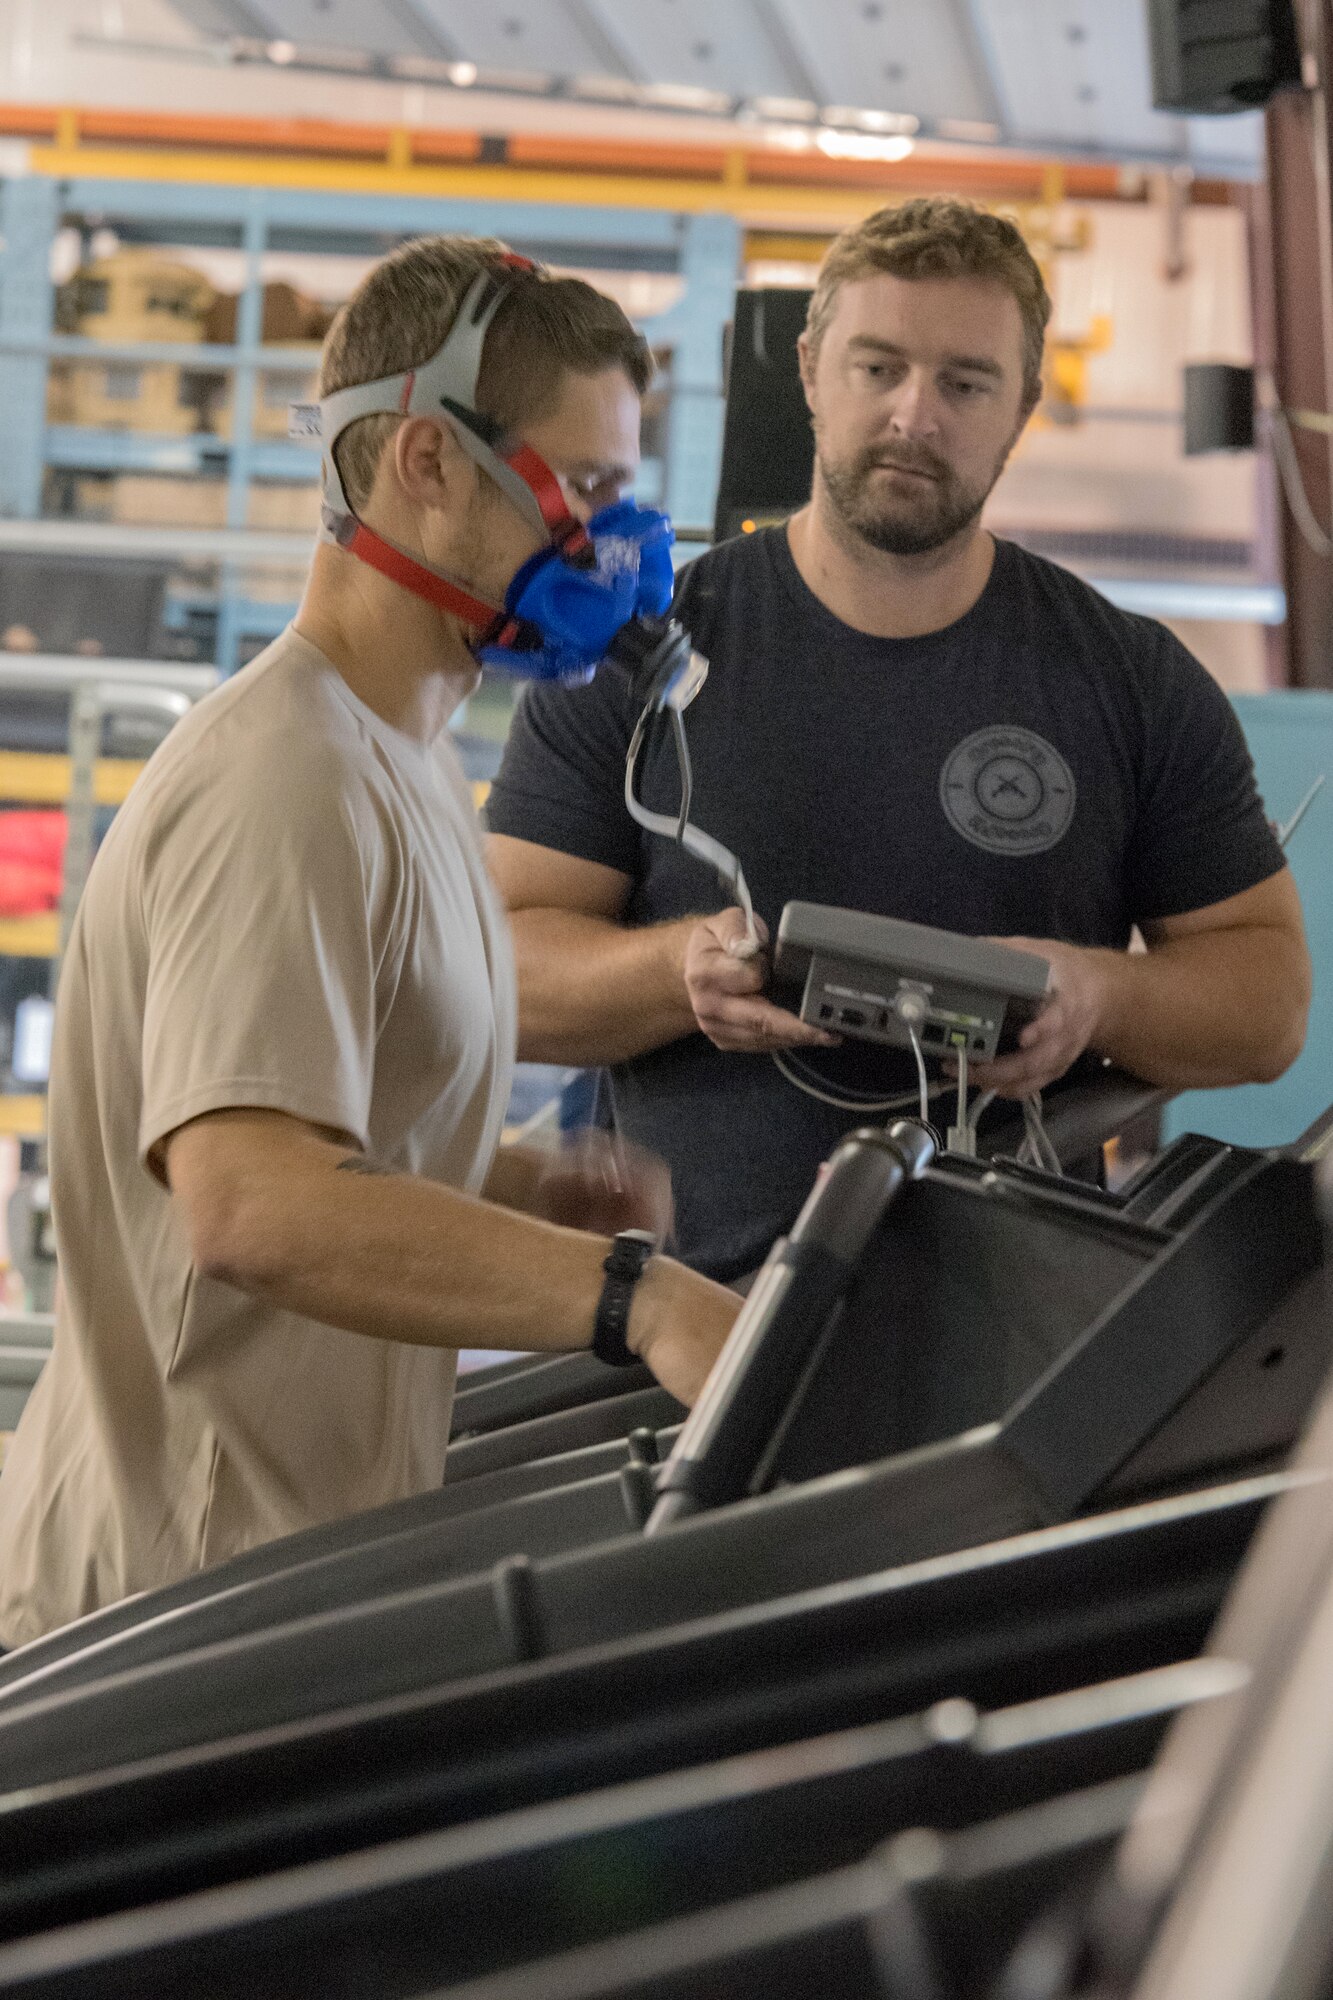 Will Lawson, lead athletic trainer and strength coach for the 123rd Special Tactics Squadron’s Human Performance Program, measures the maximal oxygen uptake of Staff Sgt. Robert Willging, a special tactics operator, during a routine evaluation at the Kentucky Air National Guard Base in Louisville, Ky., Oct. 14, 2016. Lawson is one of three trained professionals at the base who provide special operators with a multifaceted approach to strength, conditioning, injury prevention and rehabilitation. (U.S. Air National Guard photo by Tech. Sgt. Vicky Spesard)
